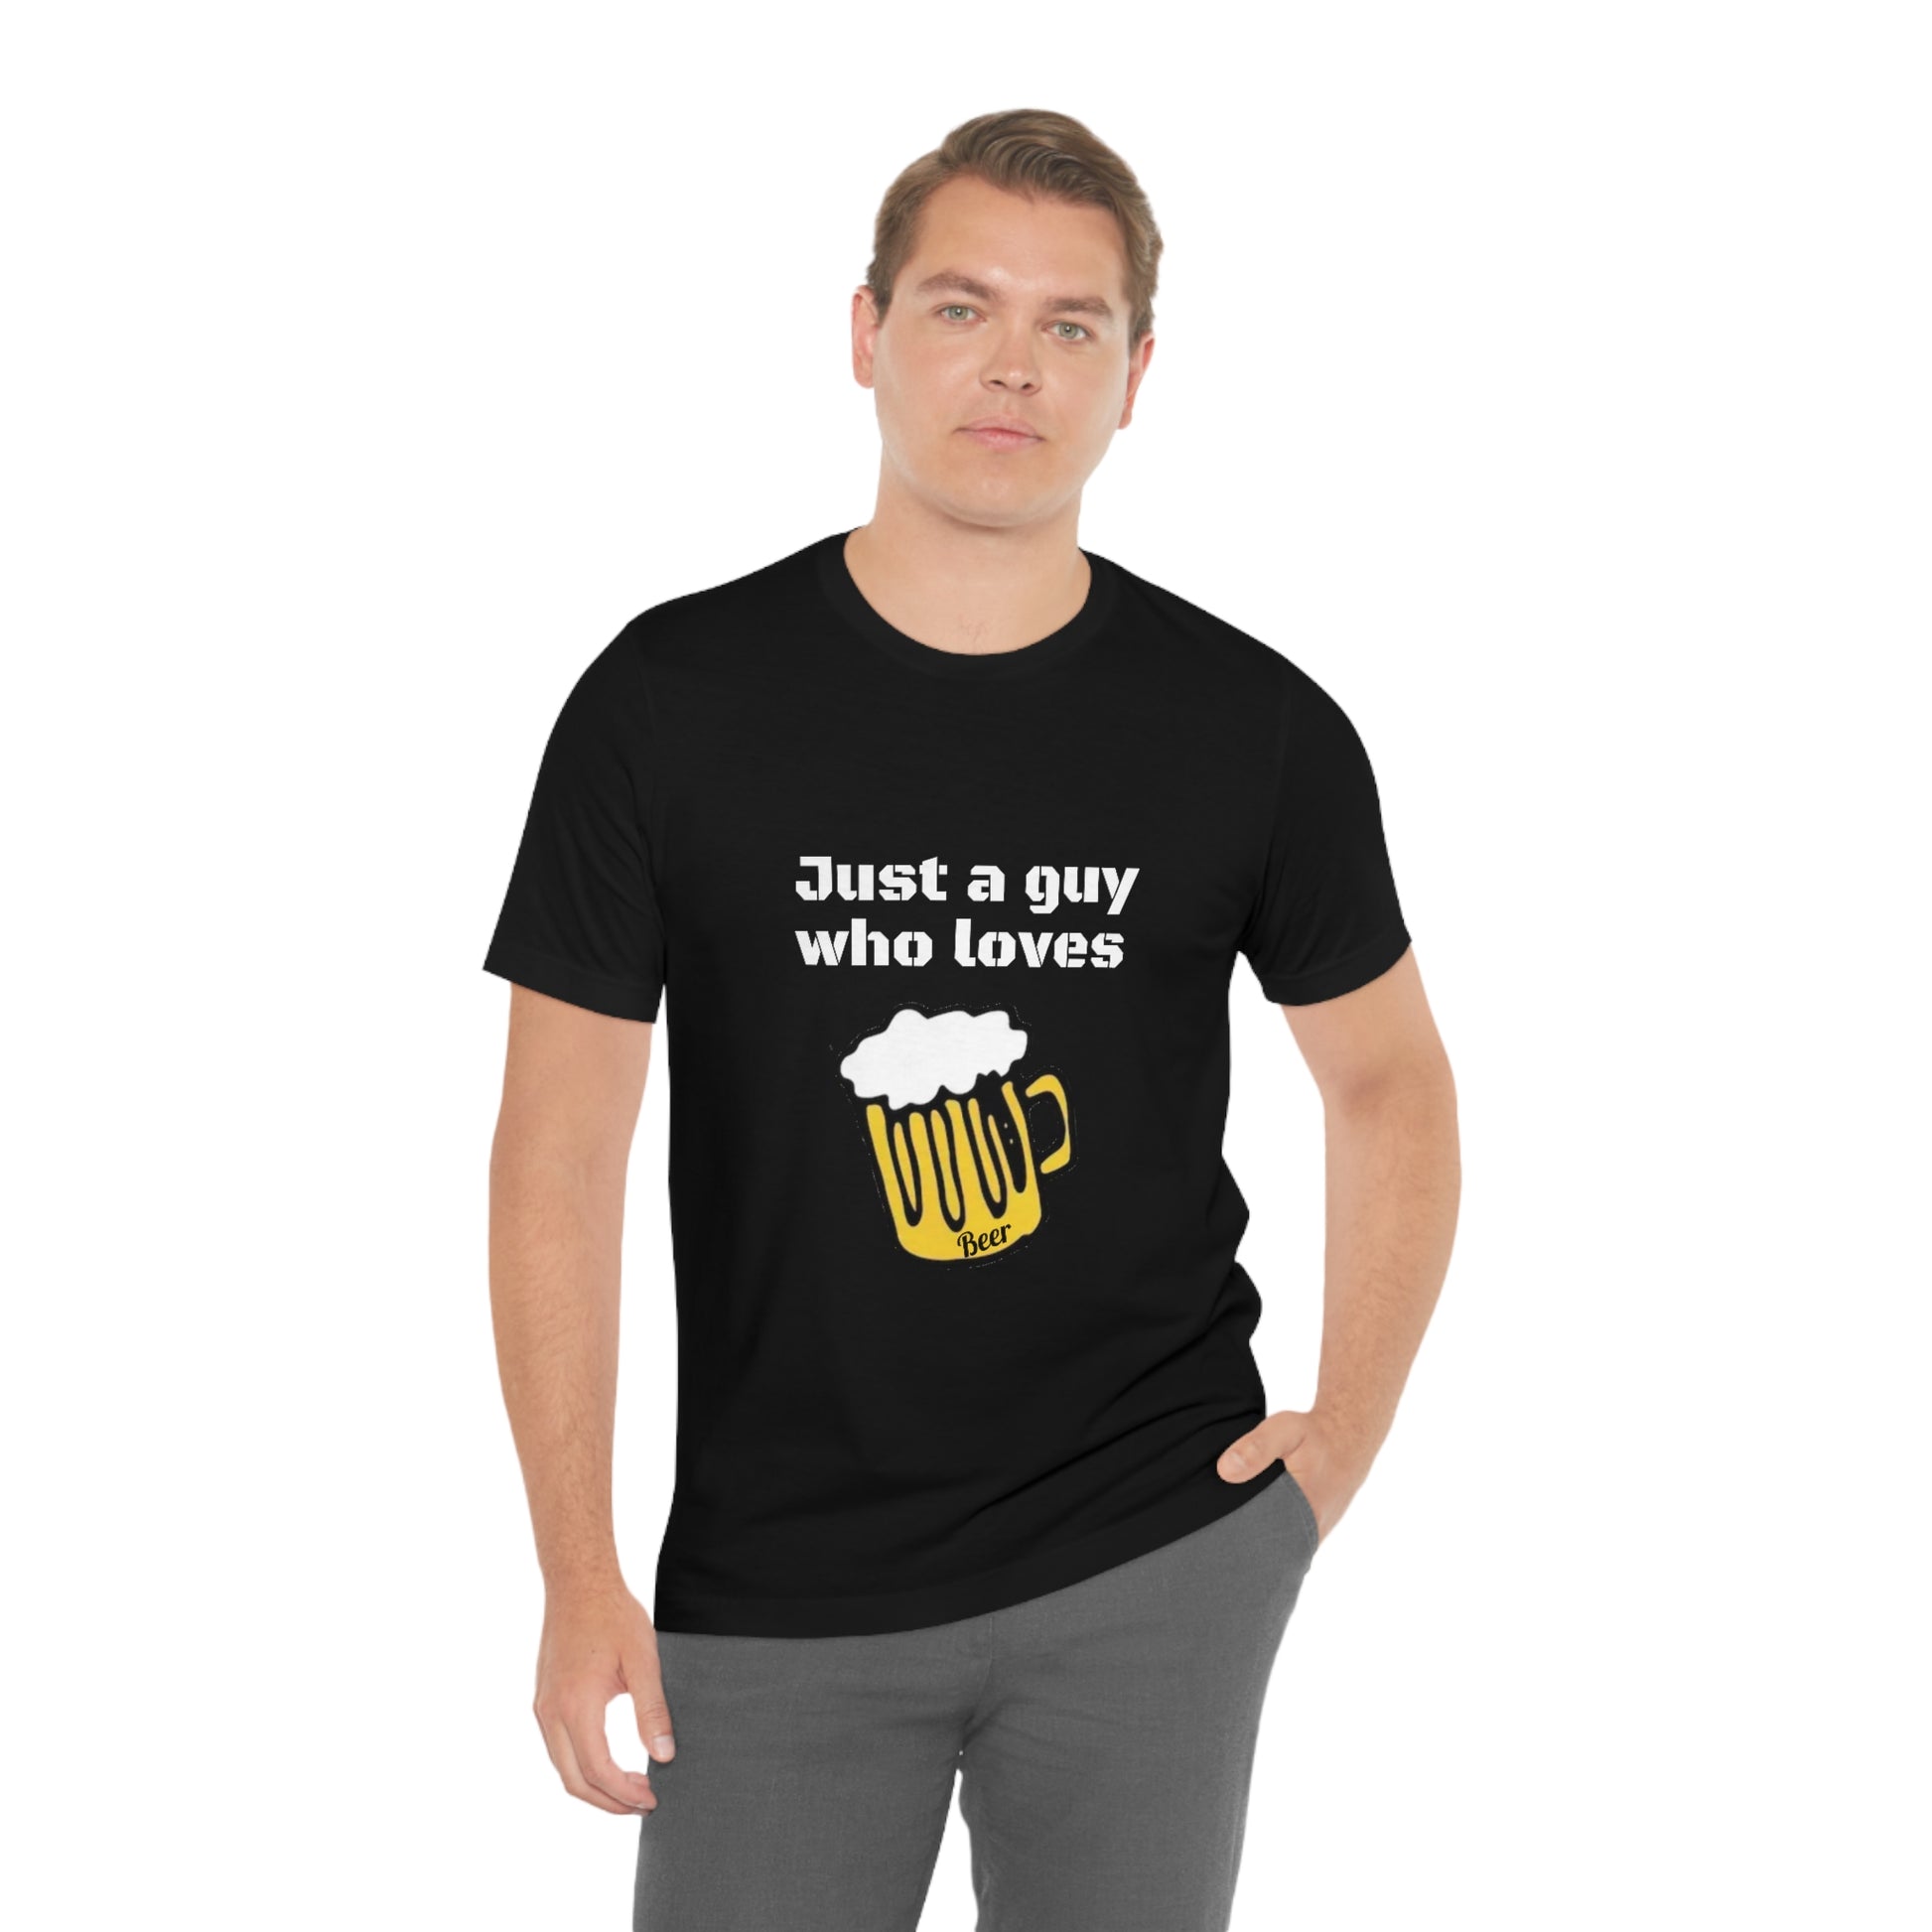 Just a guy who loves Beer - Funny Designed - Unisex Short Sleeve Tee